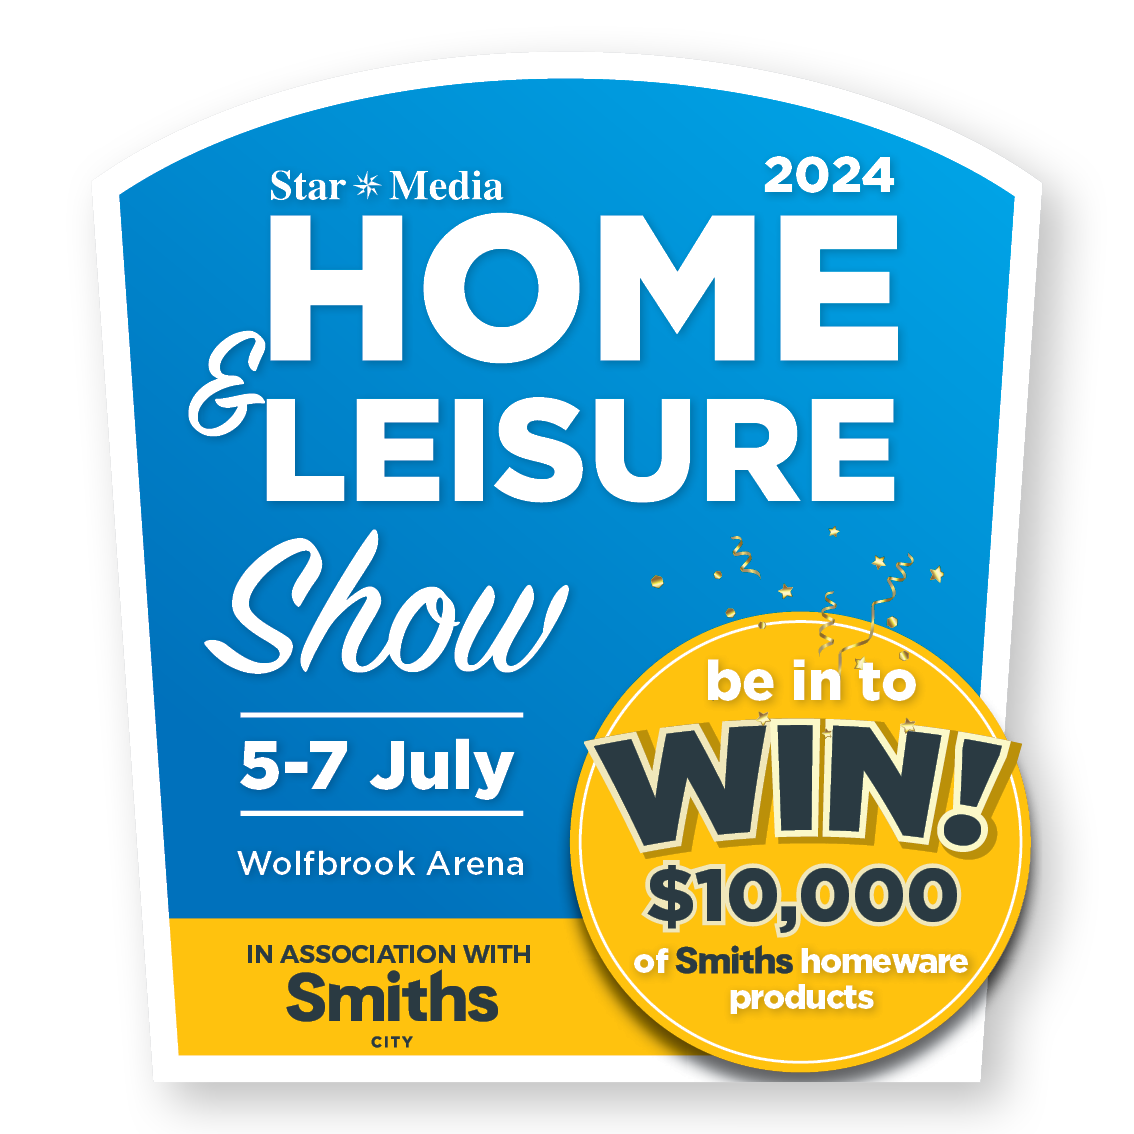 The Home & Leisure Show